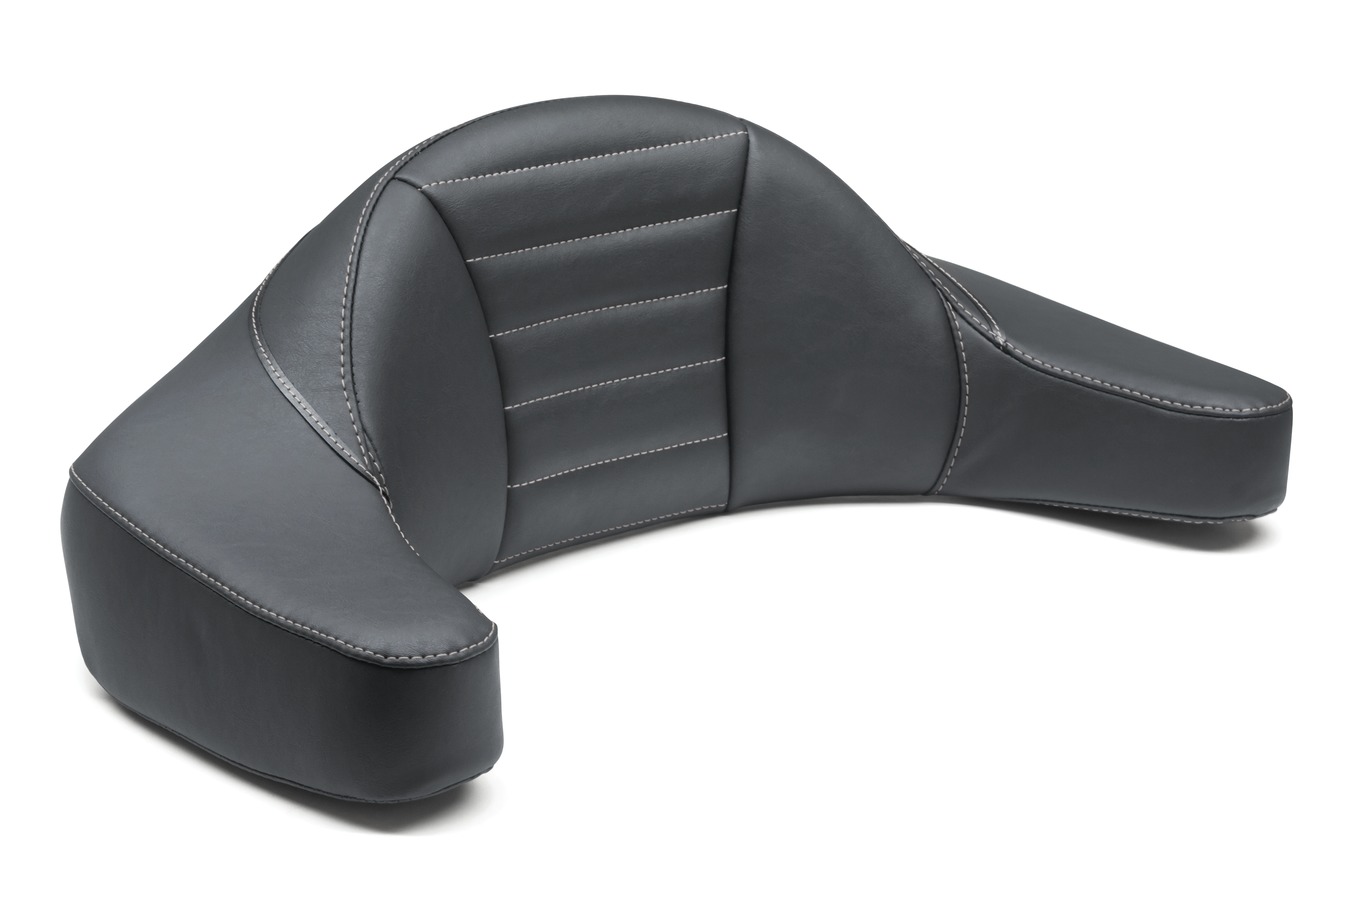 Super Touring Deluxe Extended Arm Wrap-Around Backrest for Harley-Davidson FL Touring 1993-